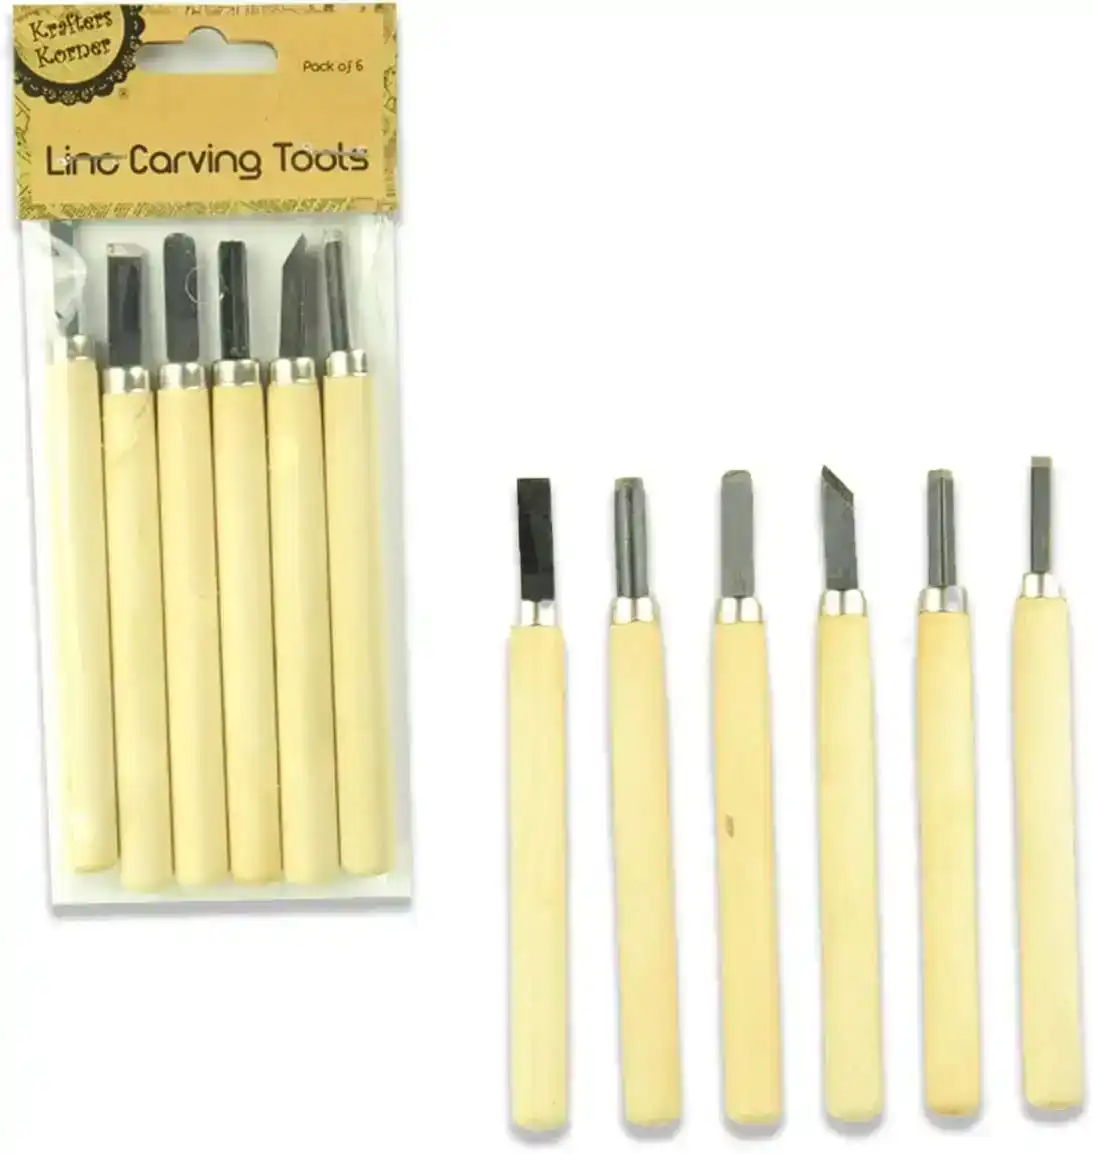 [6Pce] Krafters Korner Wooden Lino Carving Tools - 6 Different Carving Tools With Steel Nozzles